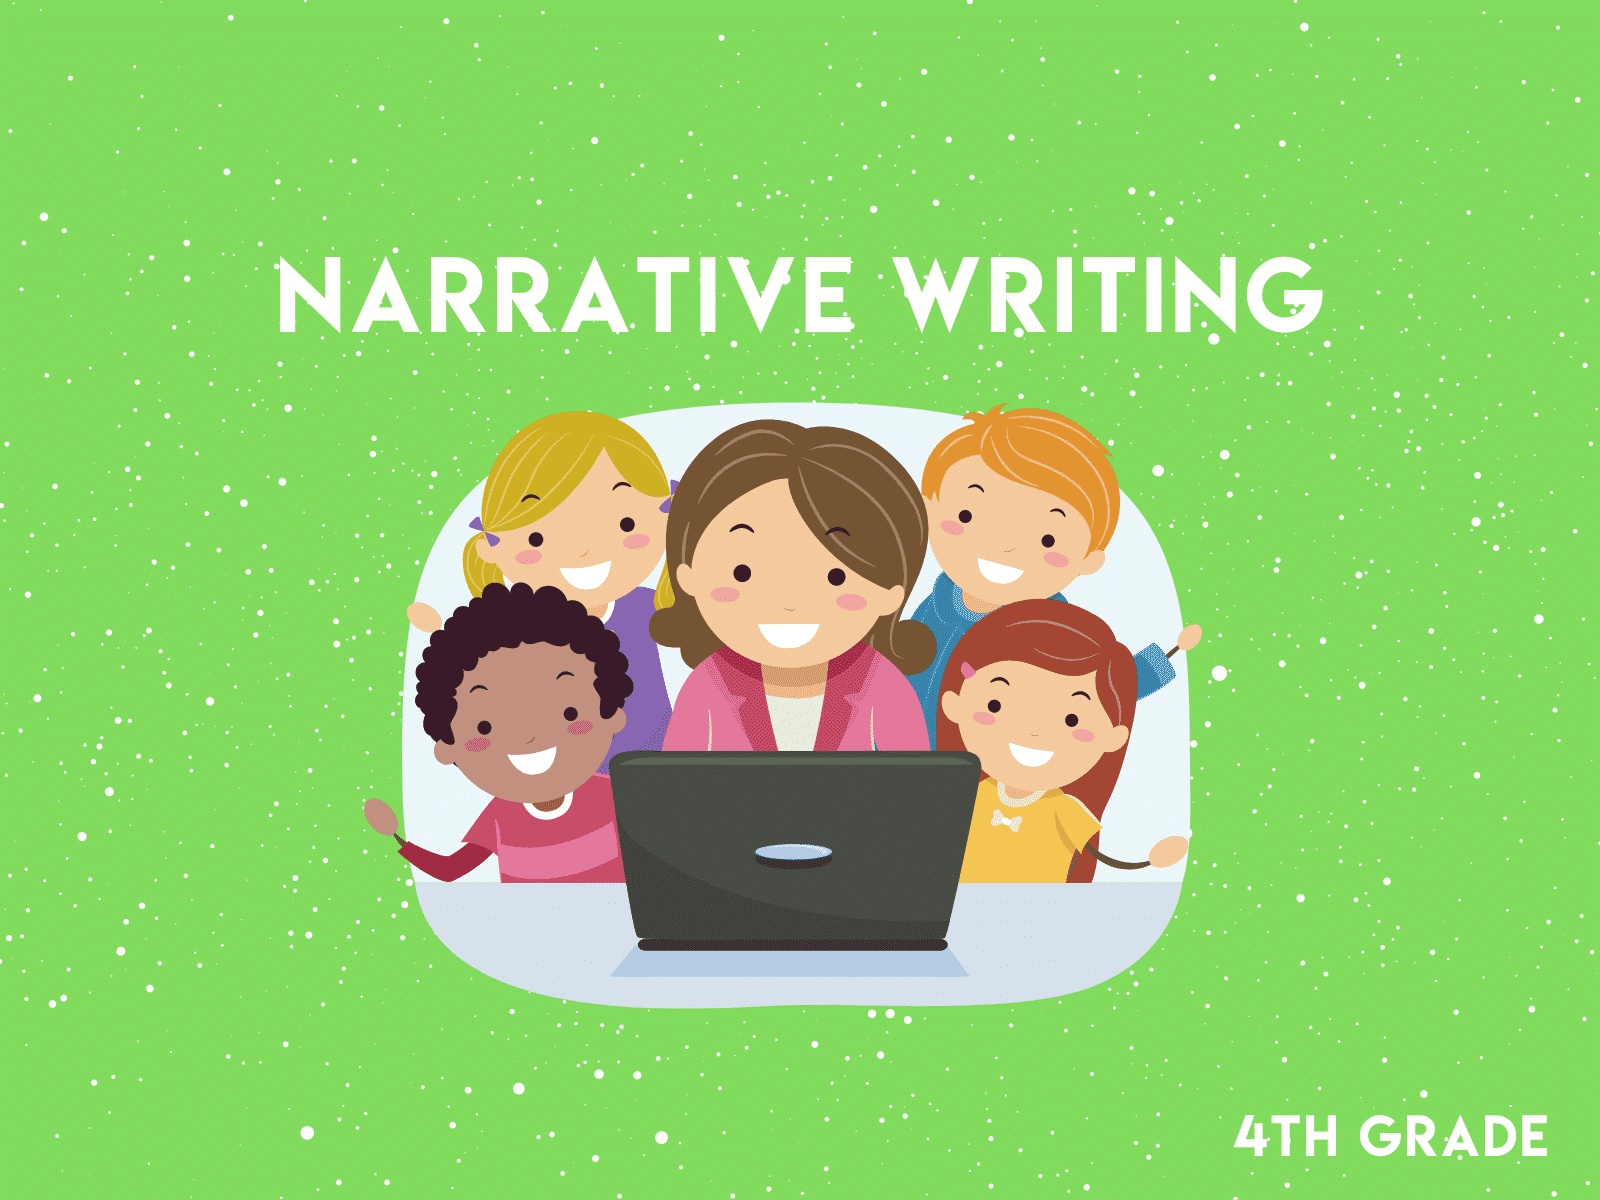 Narrative writing workbook for fourth grade writing practice